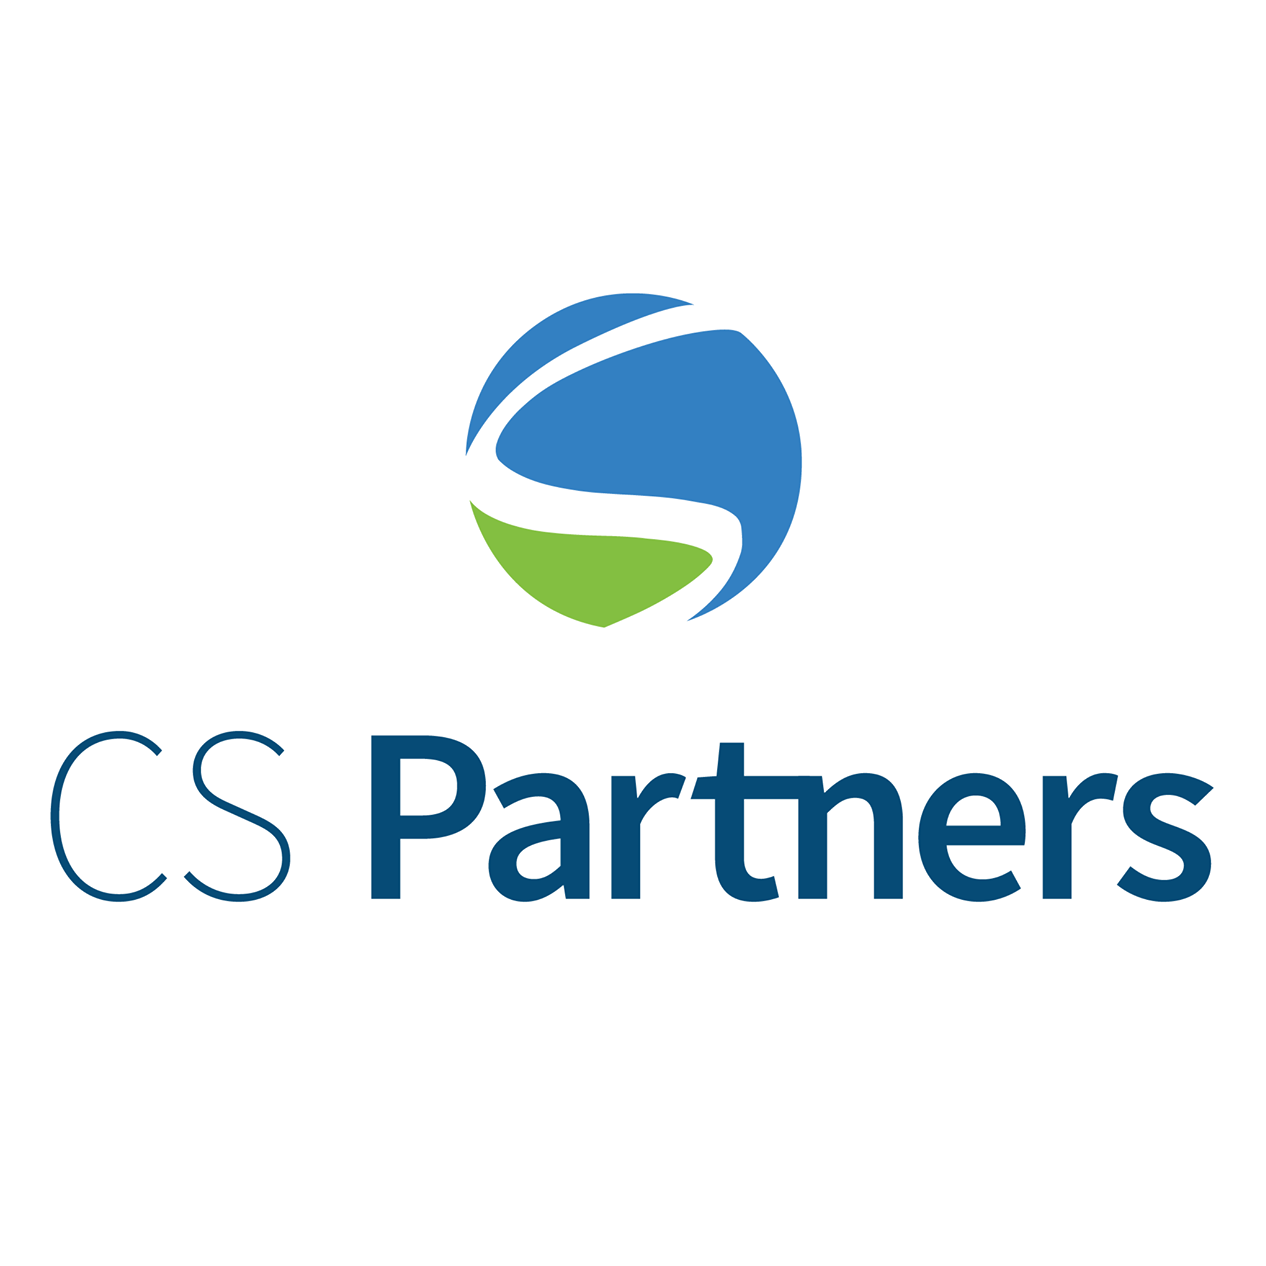 CS Partners - Official Seal or Logo